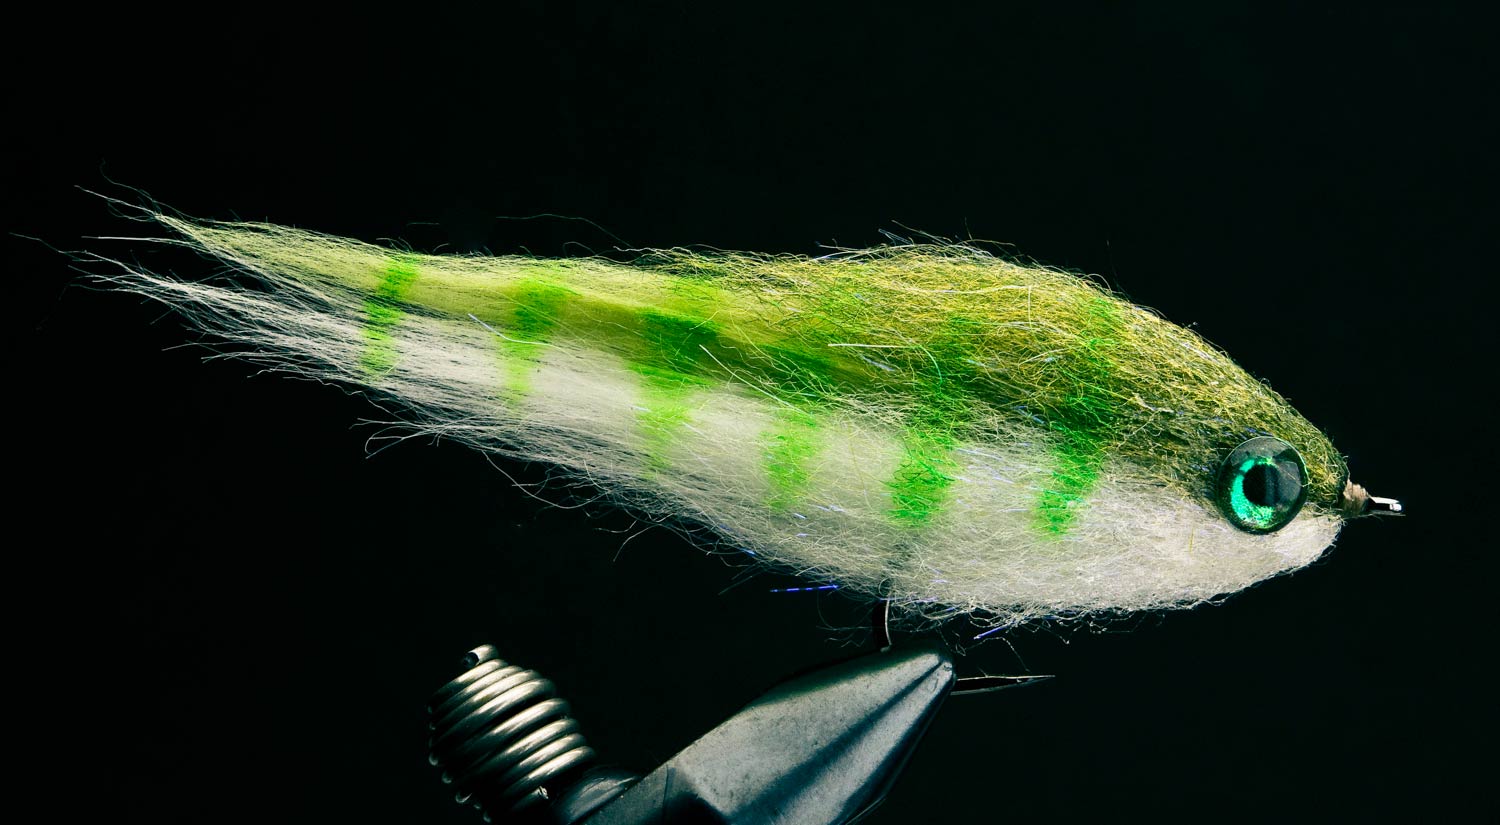 tying tiny flies - Fly Fishing, Gink and Gasoline